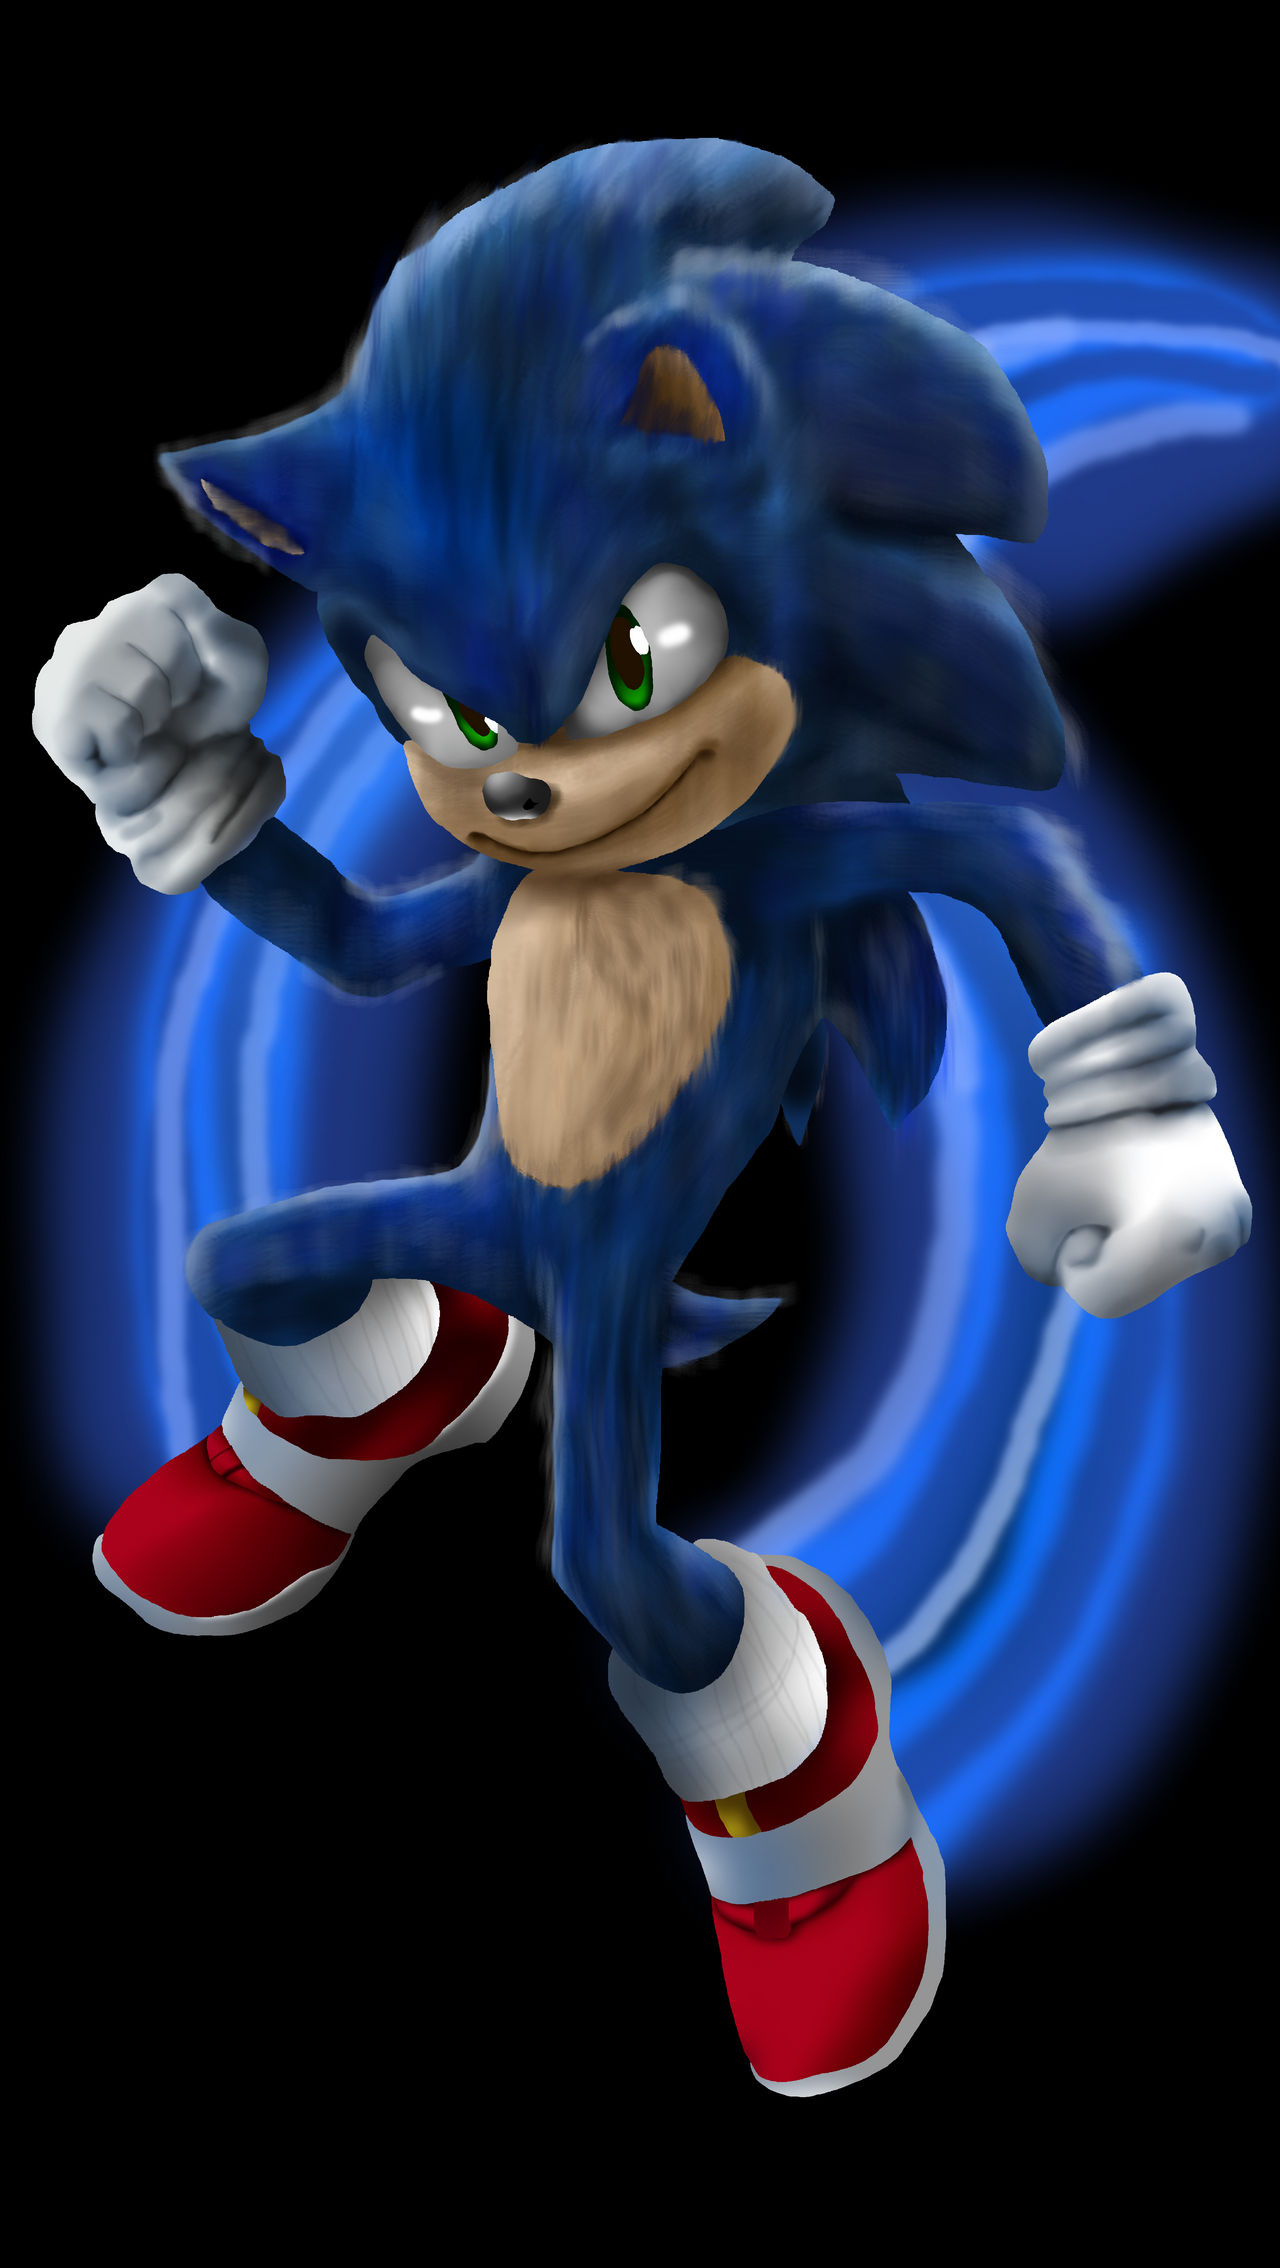 Realistic Sonic V2 by mateus2014 on DeviantArt